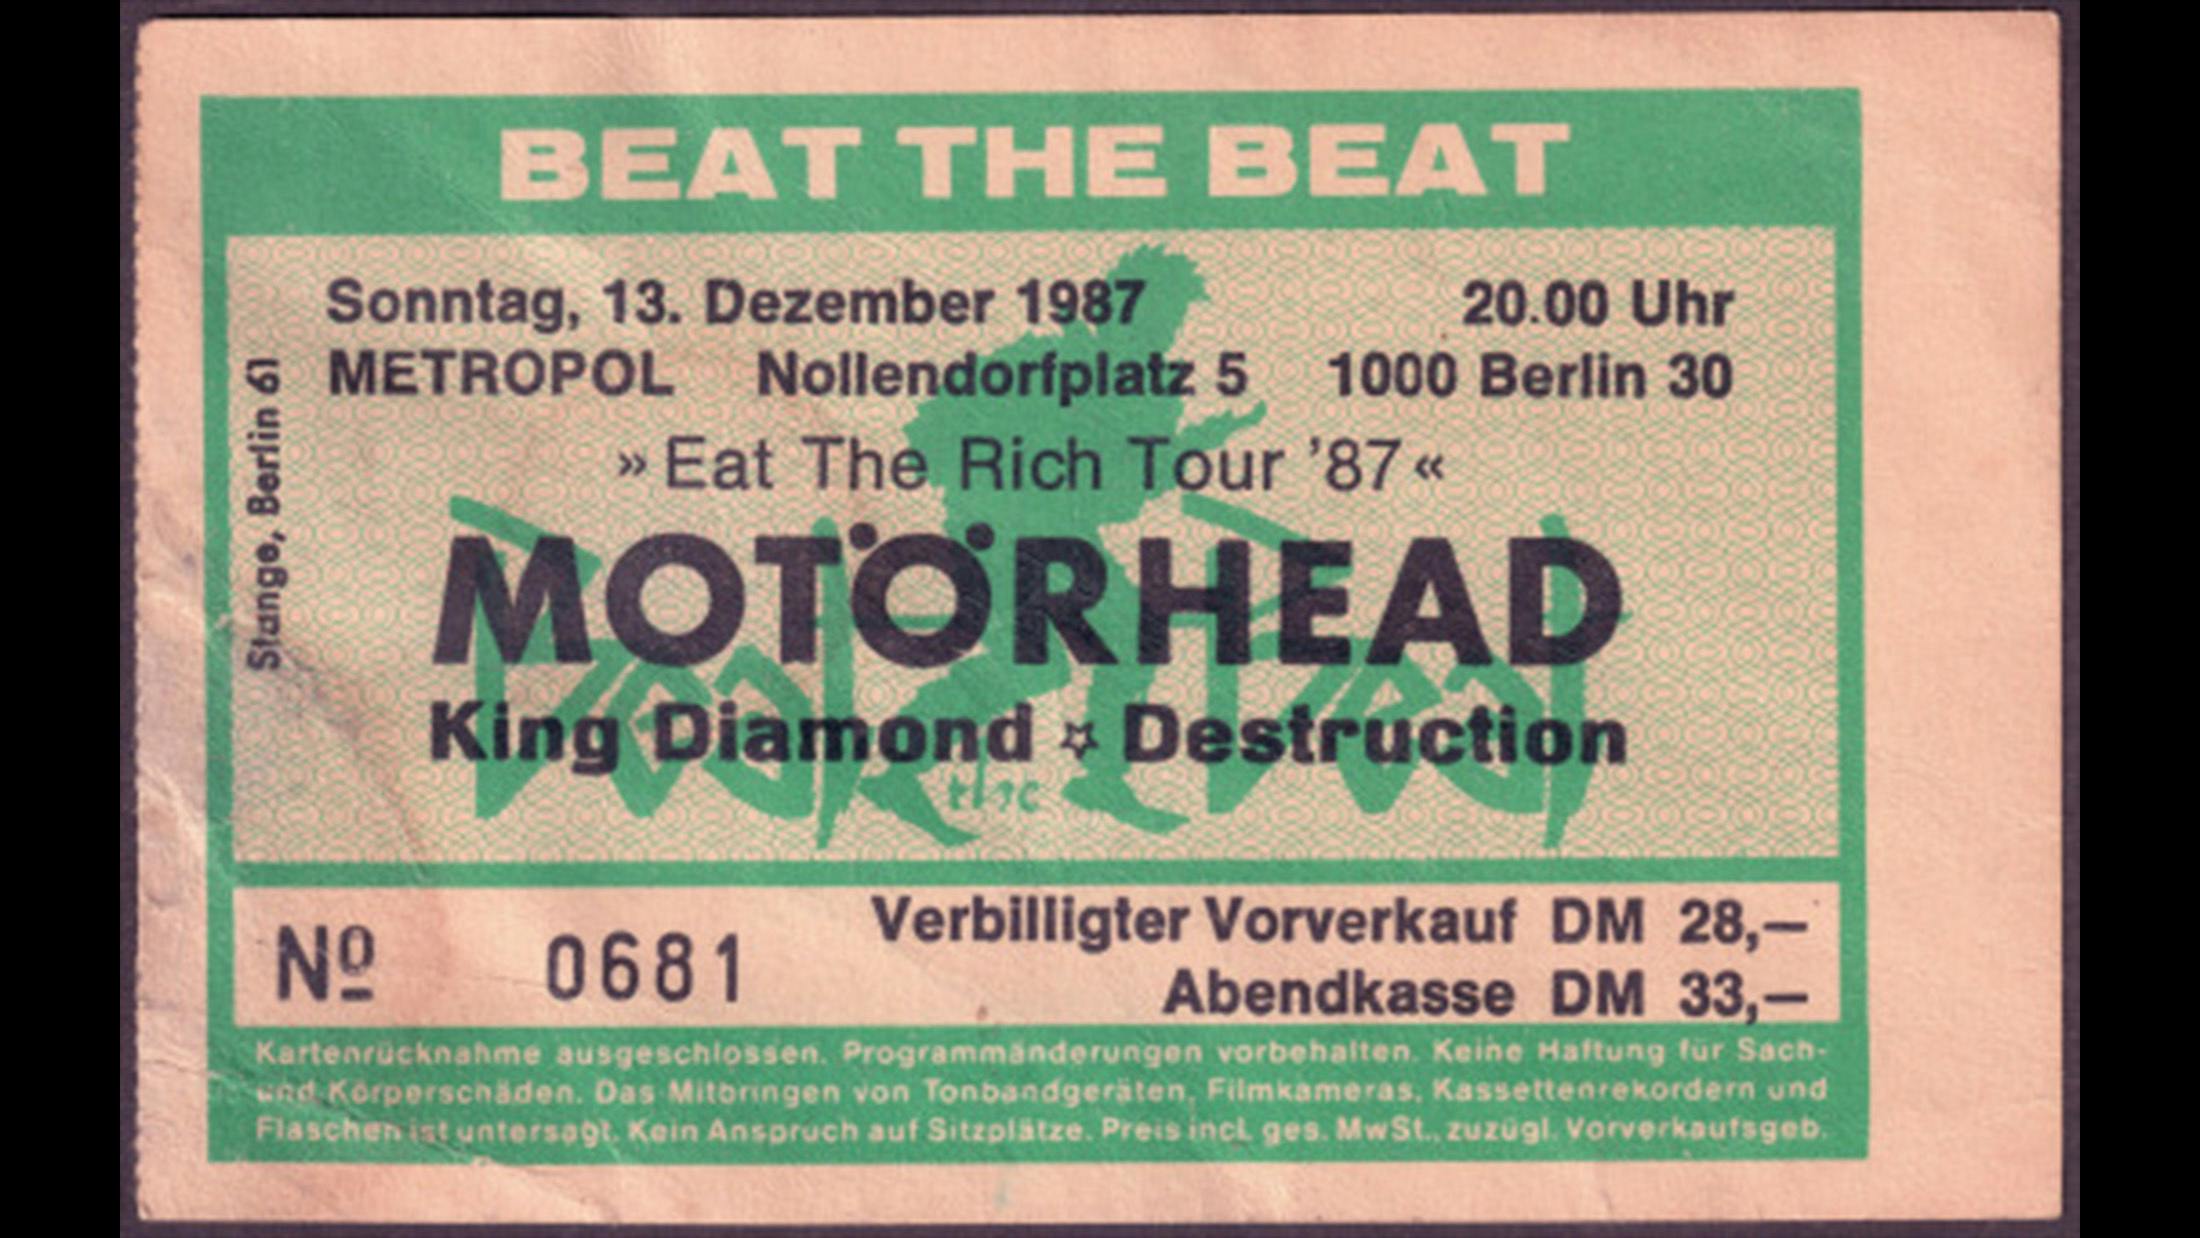 This ticket is from the first Motörhead tour we did in 1987 with King Diamond. Lemmy met Mickey Dee there for the first time and the rest is history. The tour was amazing, many fans still talk to me about it. We toured with Motörhead many times after this one – it was always the best experience we could ever have.